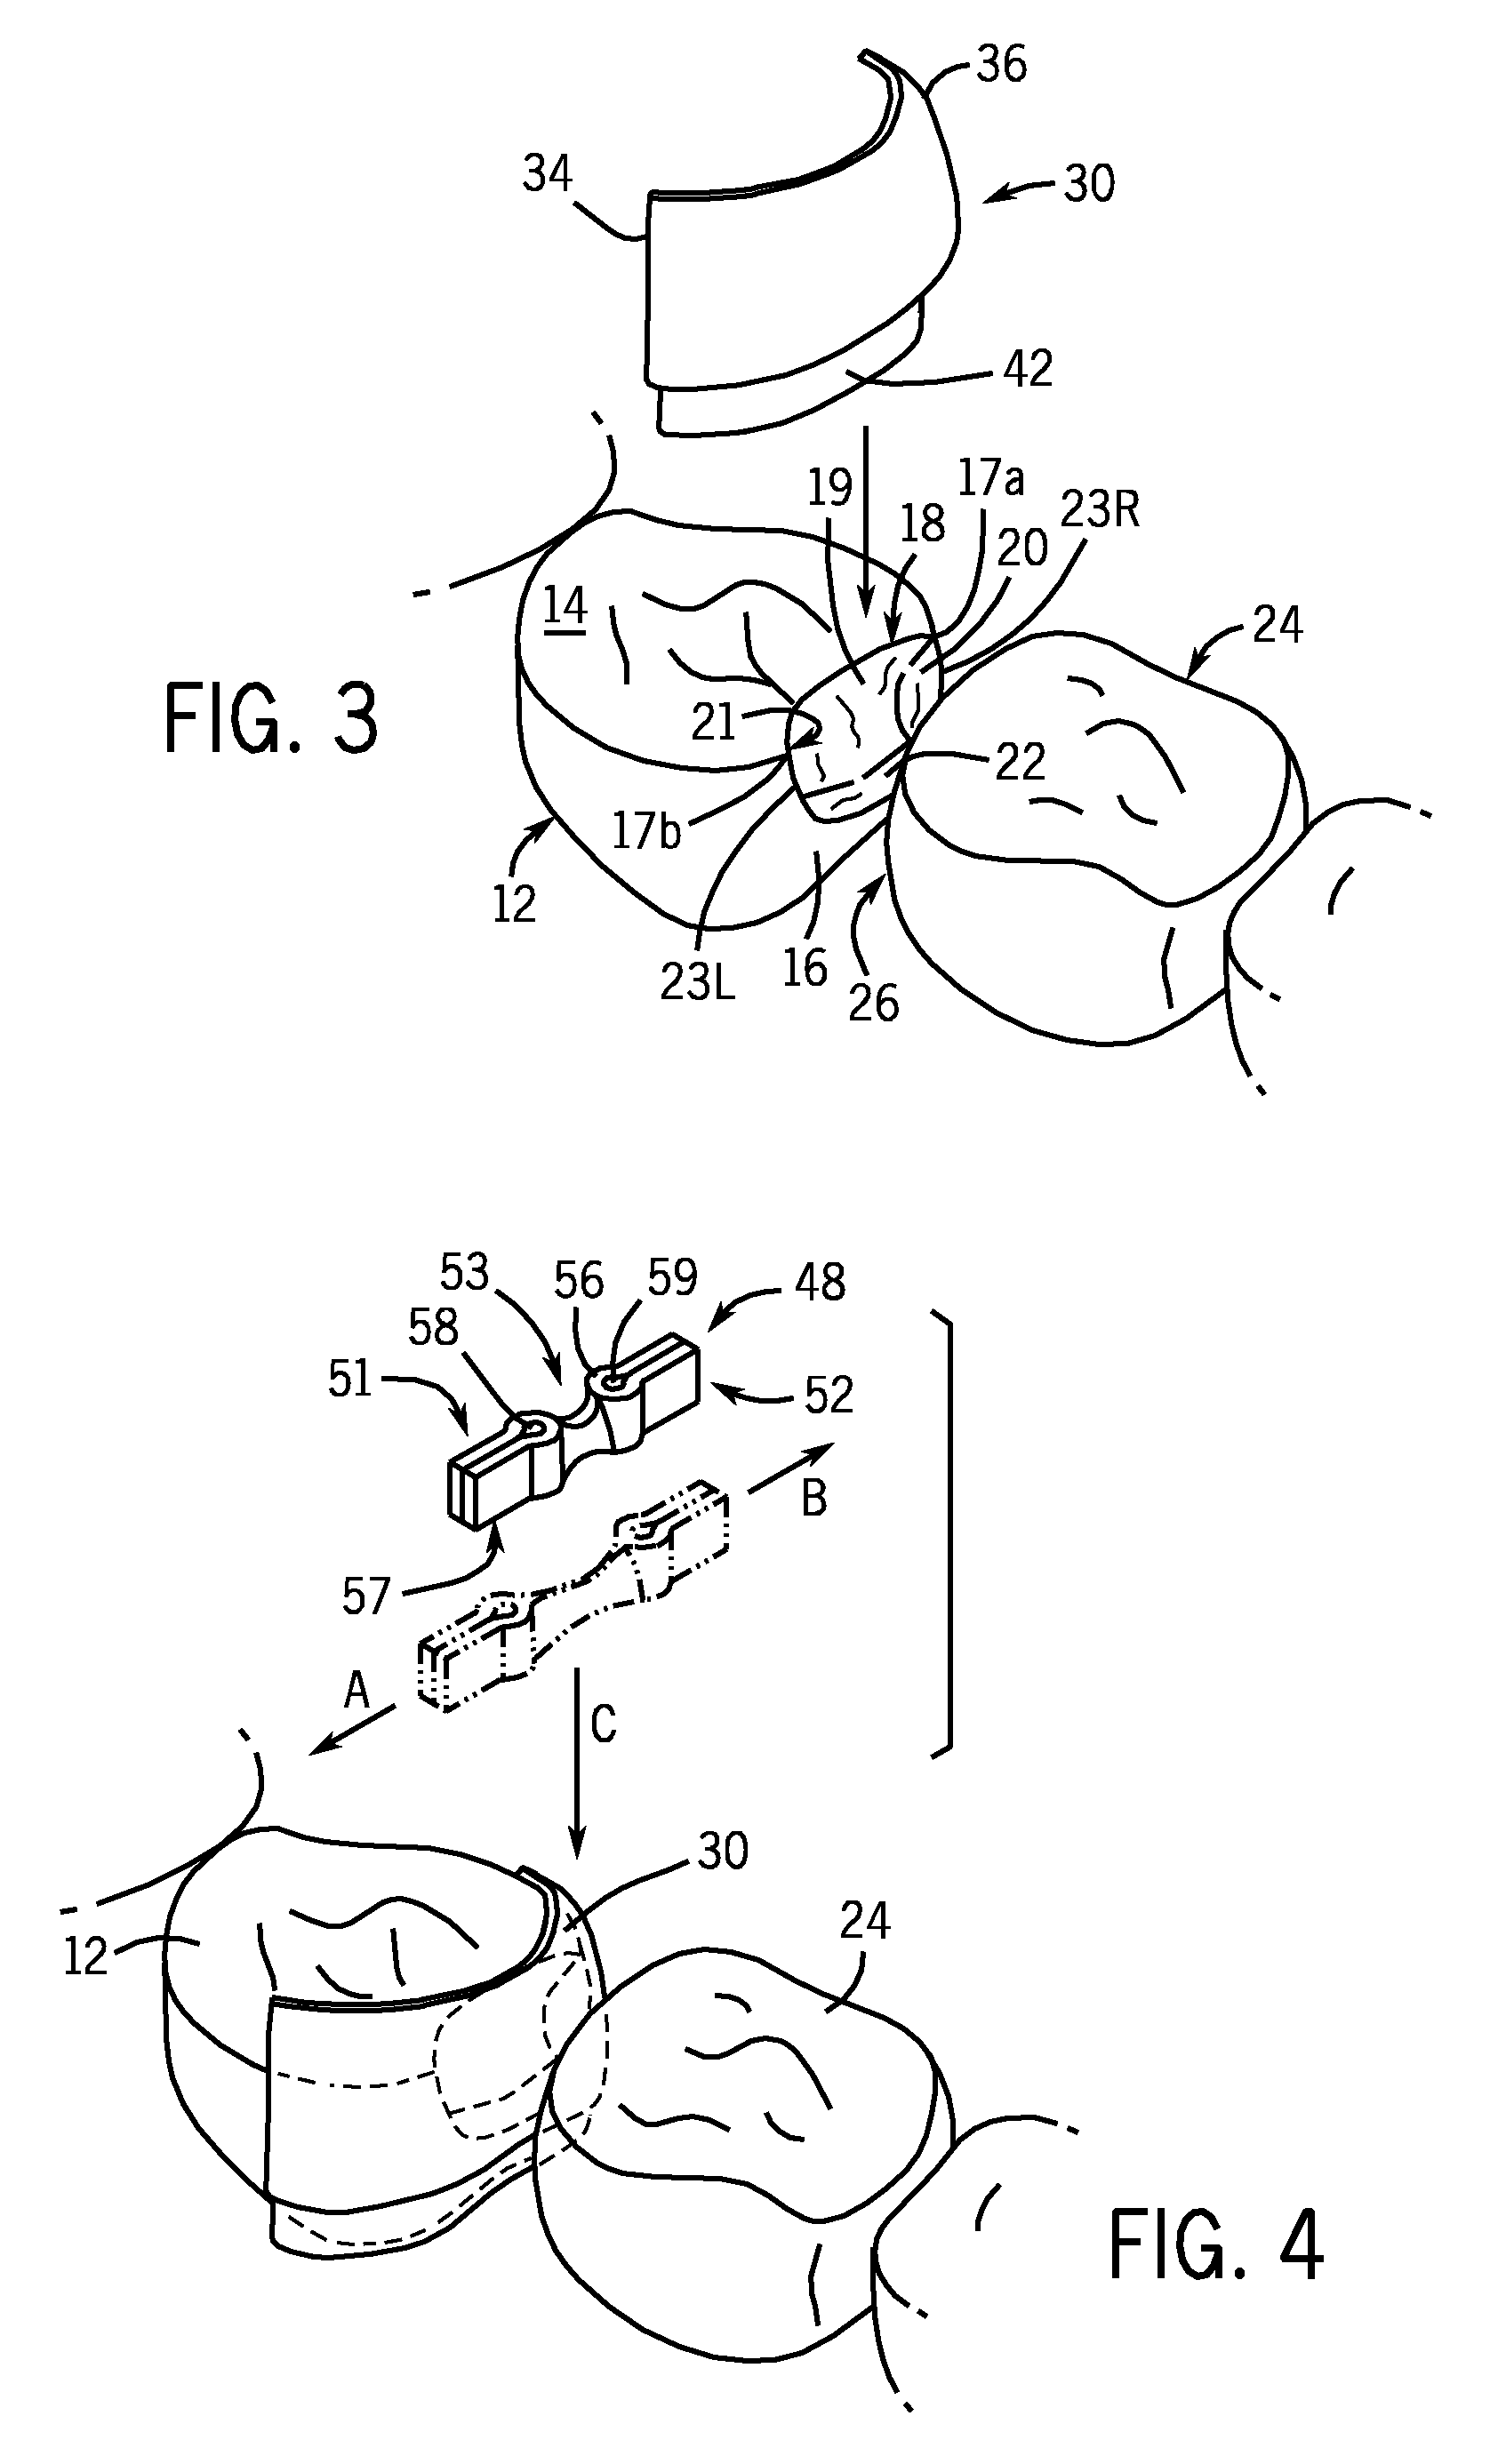 Dental Matrix Devices And A Seamless, Single Load Cavity Preparation And Filling Technique